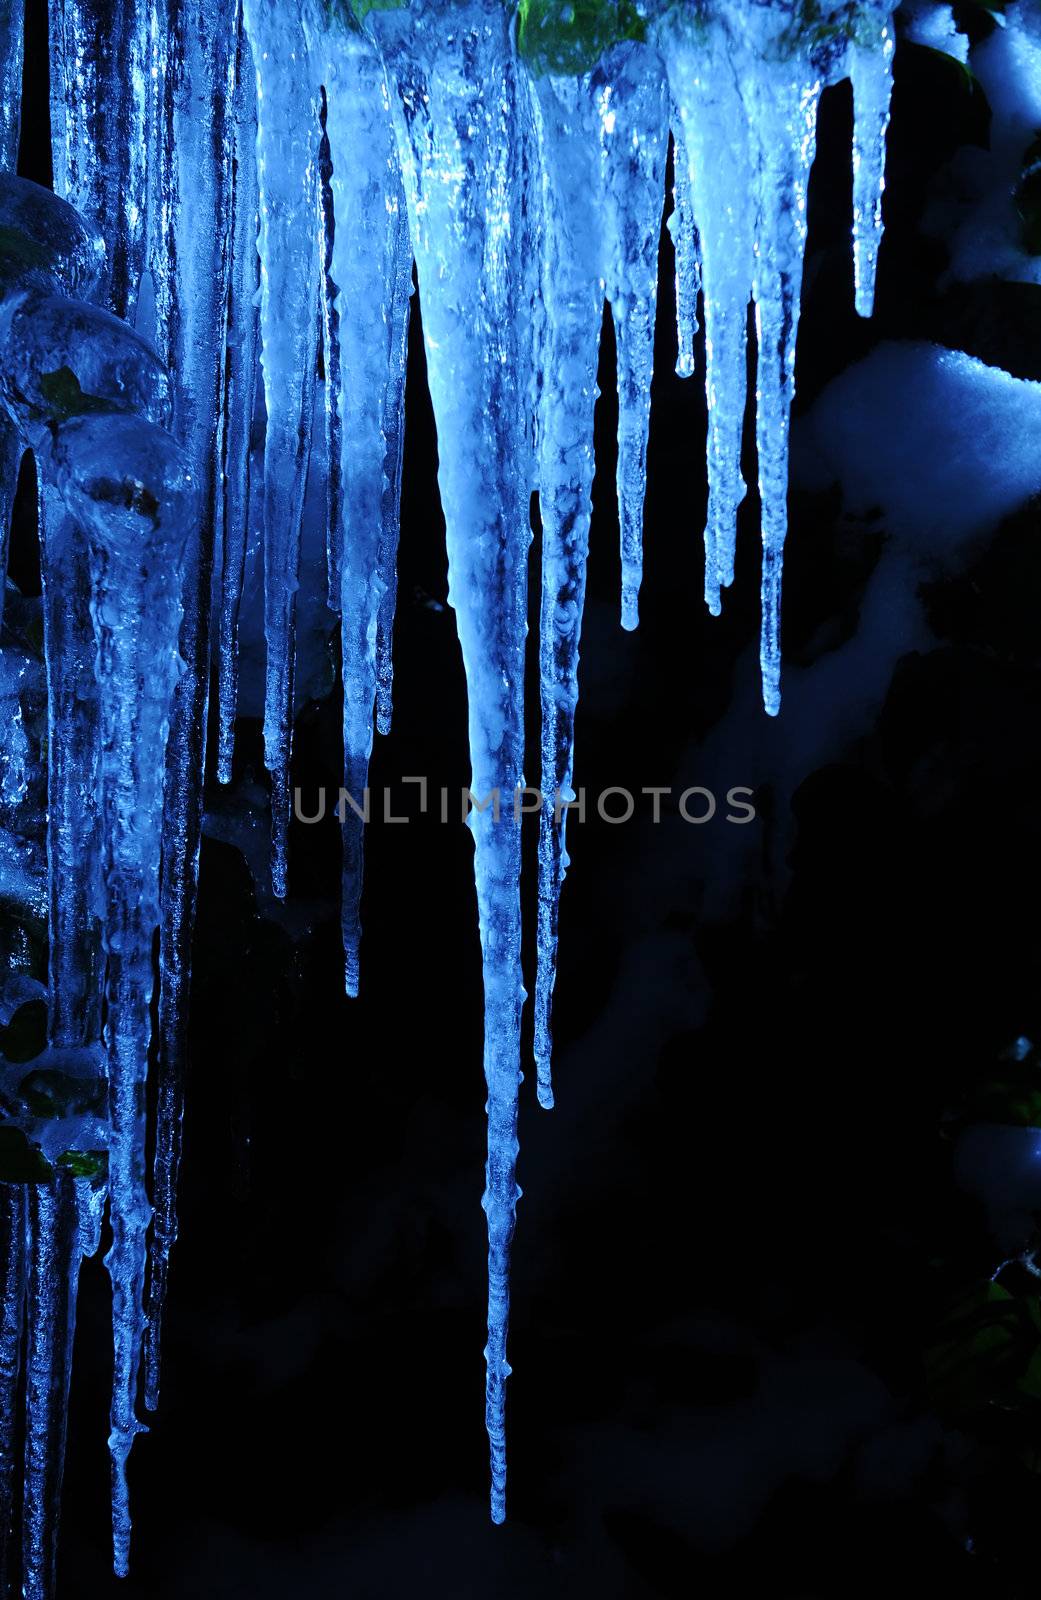 Icicles in cold blue light shining in the darkness at night